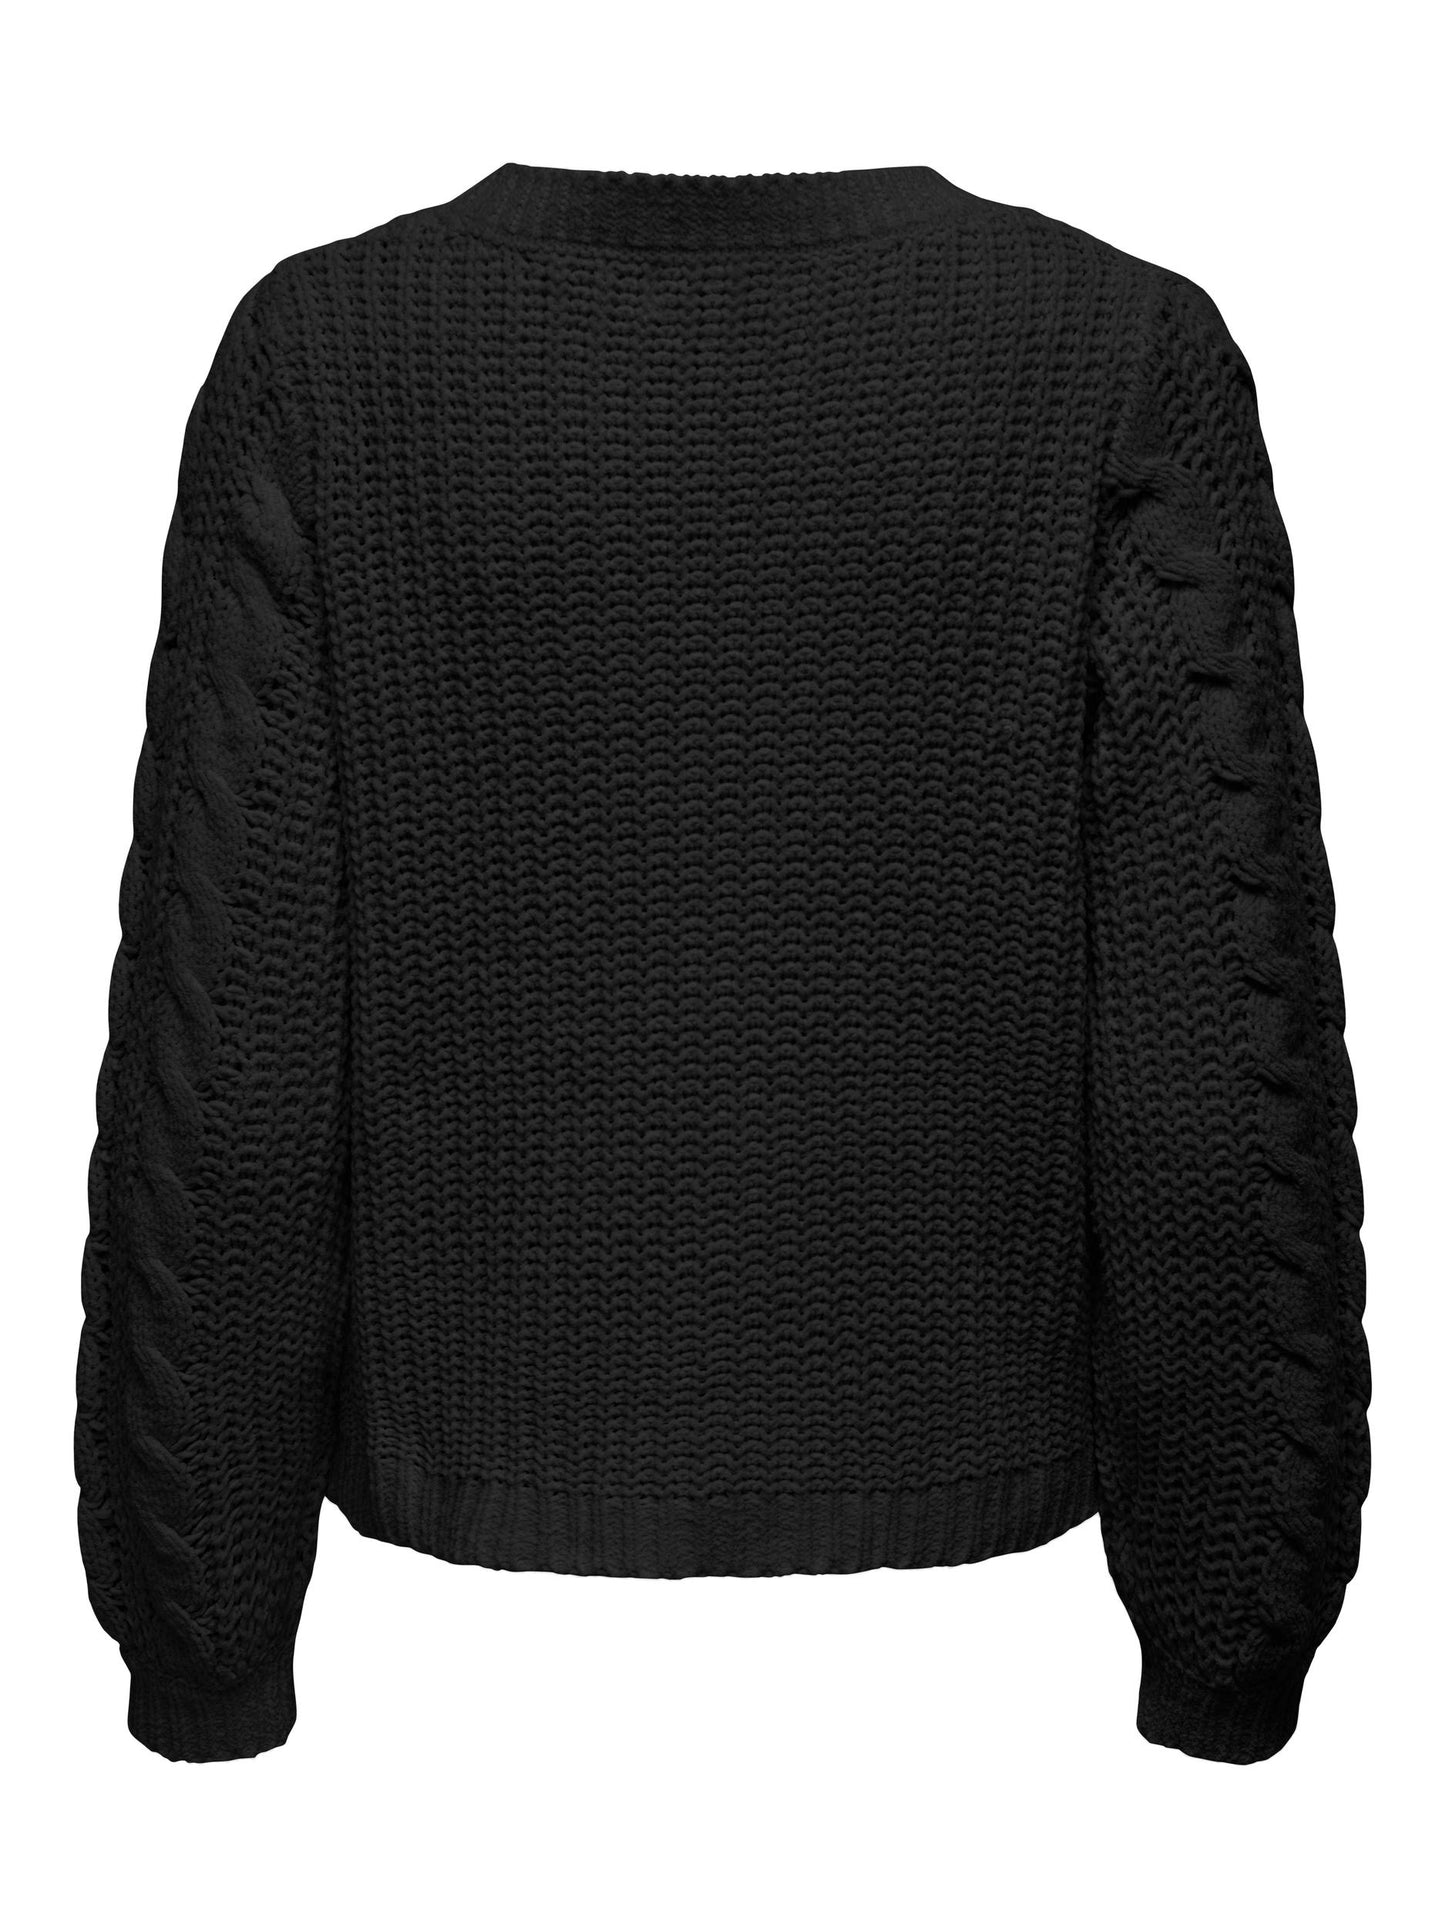 JDYJOSIA L/S CABLE FRONT PULLOVER KNT BLACK